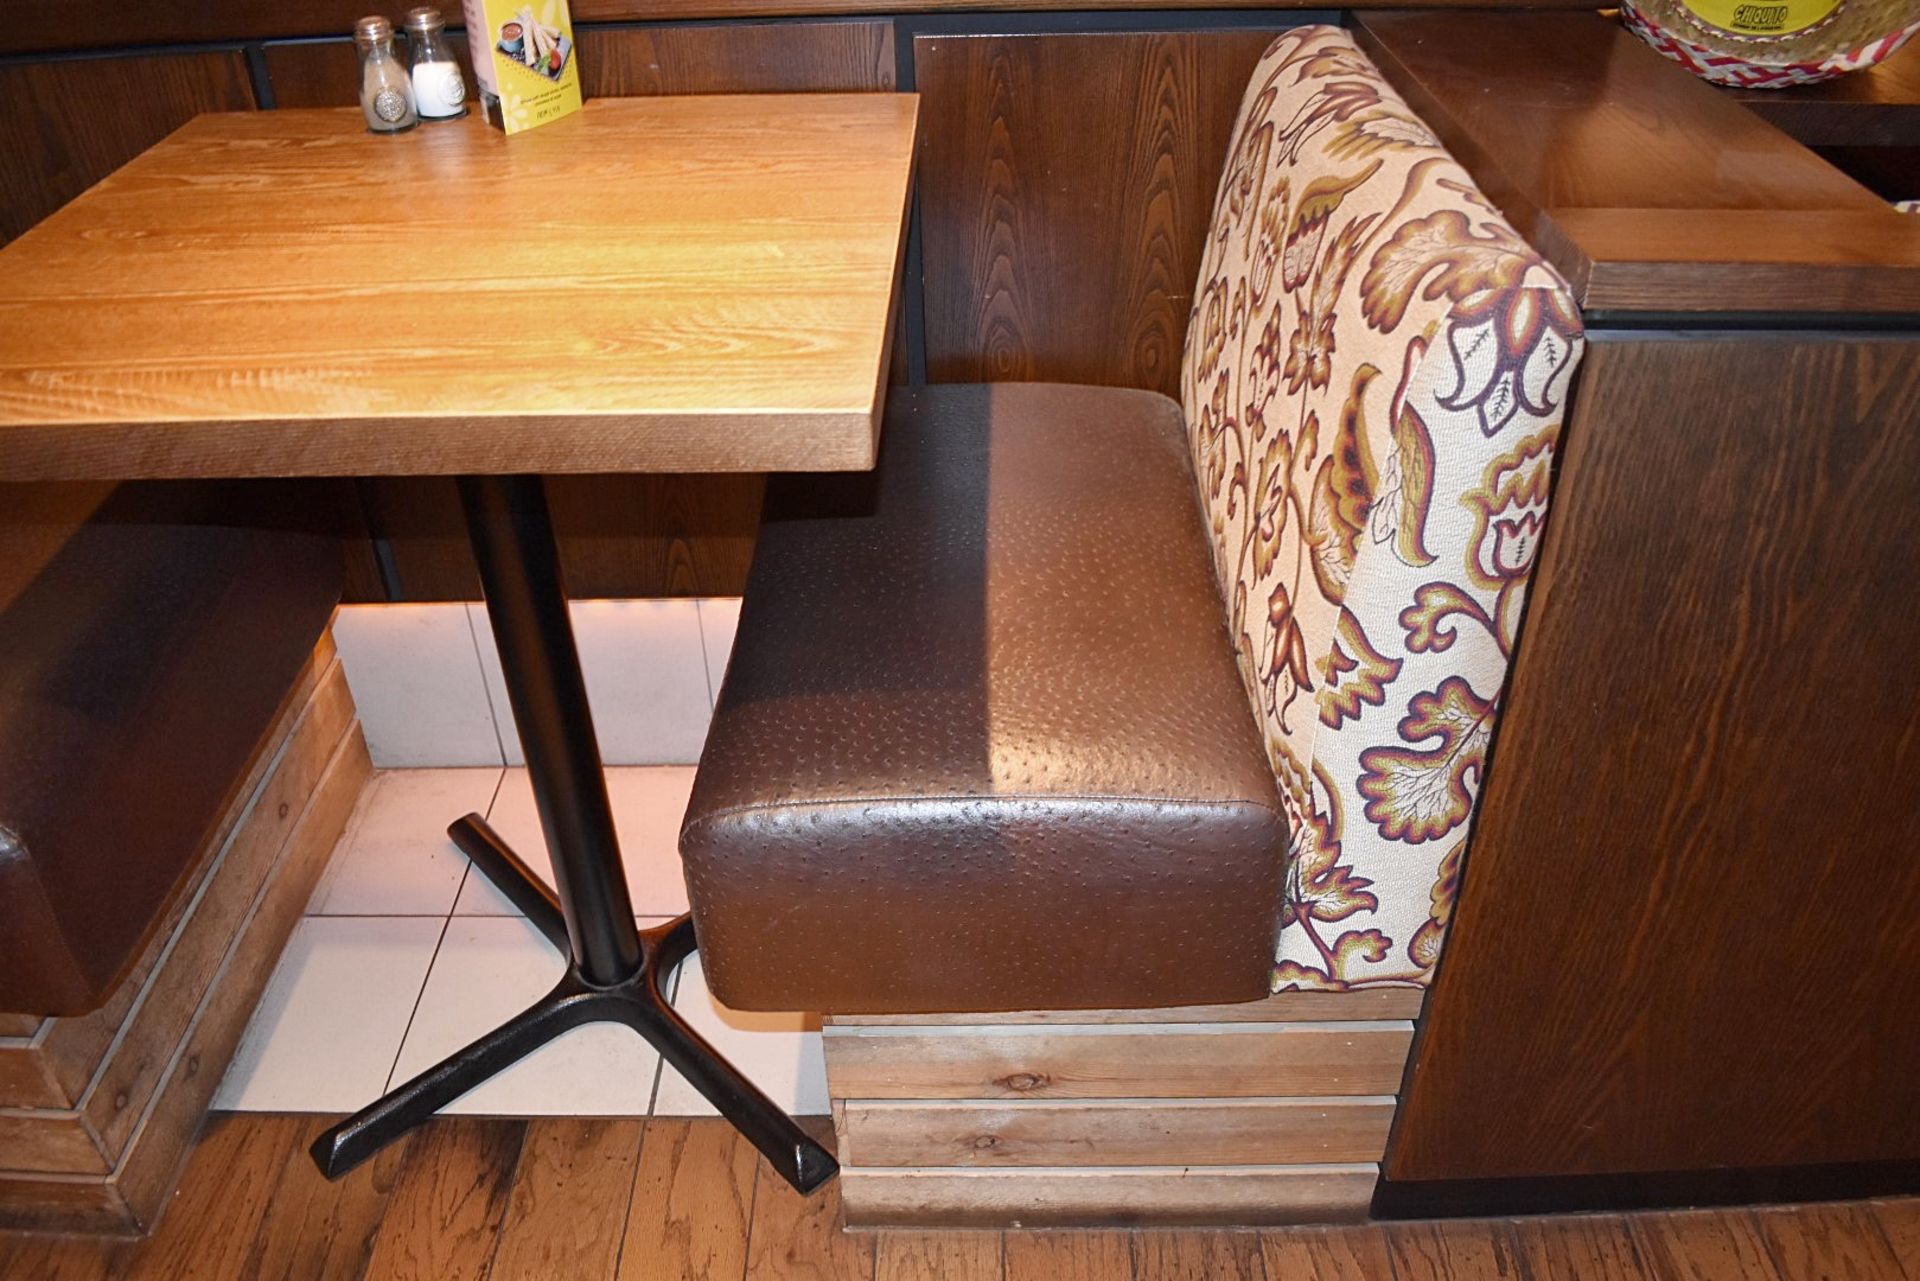 15-Pieces Of Restaurant Booth Seating Of Varying Length - Image 5 of 22